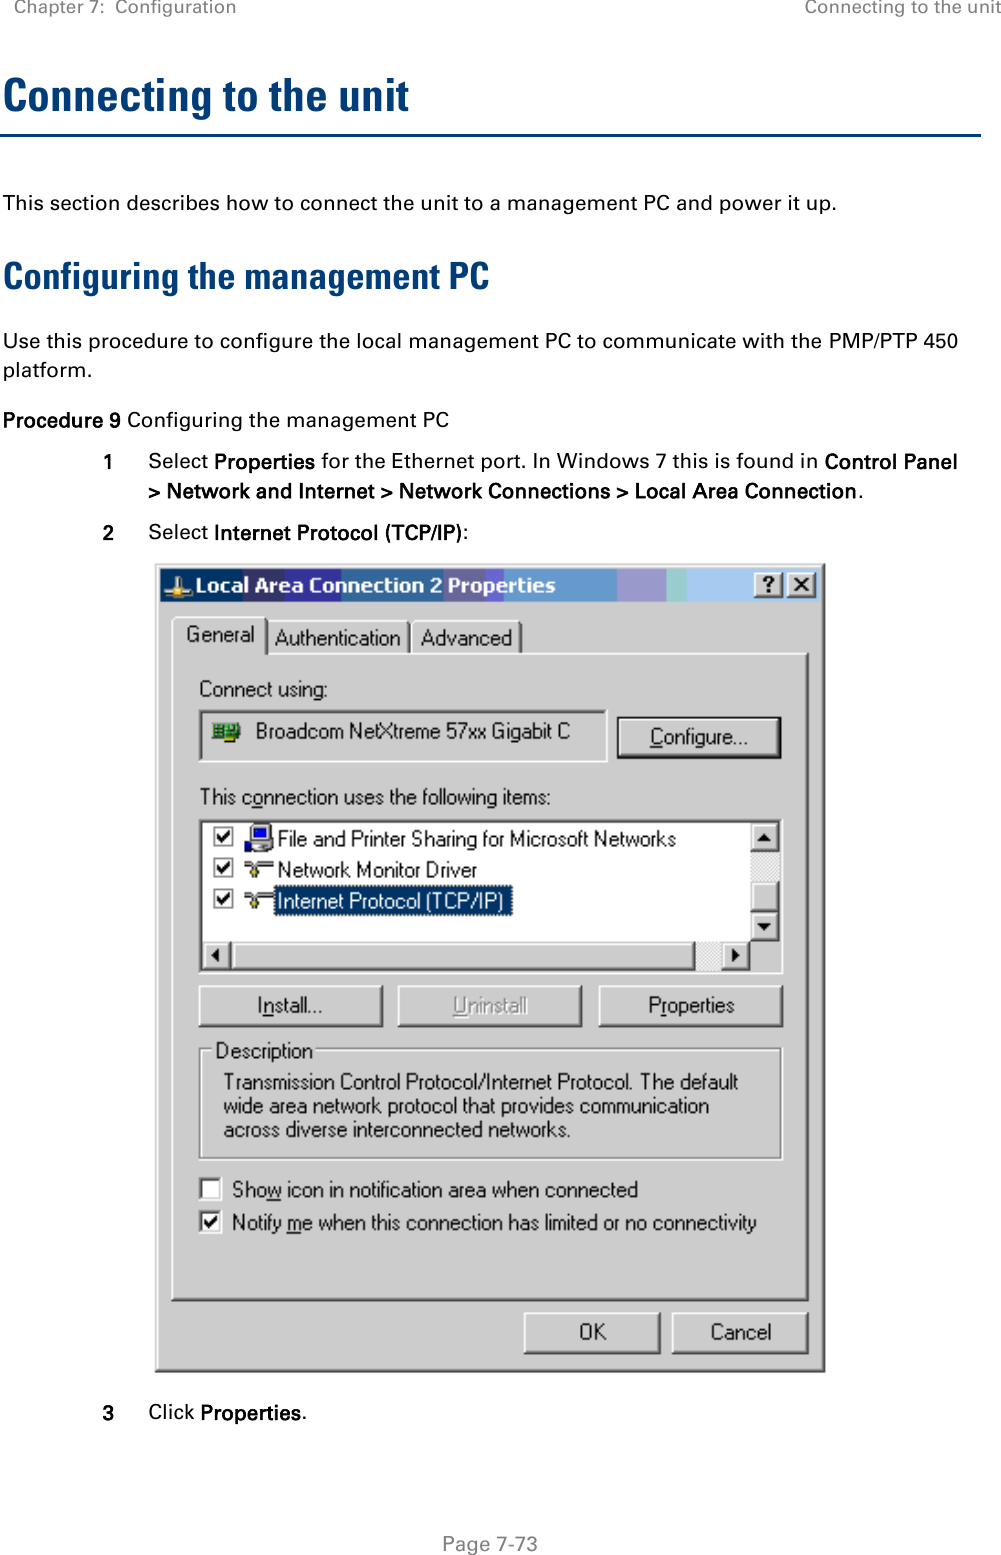 Chapter 7:  Configuration Connecting to the unit   Page 7-73 Connecting to the unit This section describes how to connect the unit to a management PC and power it up.  Configuring the management PC Use this procedure to configure the local management PC to communicate with the PMP/PTP 450 platform. Procedure 9 Configuring the management PC 1 Select Properties for the Ethernet port. In Windows 7 this is found in Control Panel &gt; Network and Internet &gt; Network Connections &gt; Local Area Connection. 2 Select Internet Protocol (TCP/IP):  3 Click Properties. 